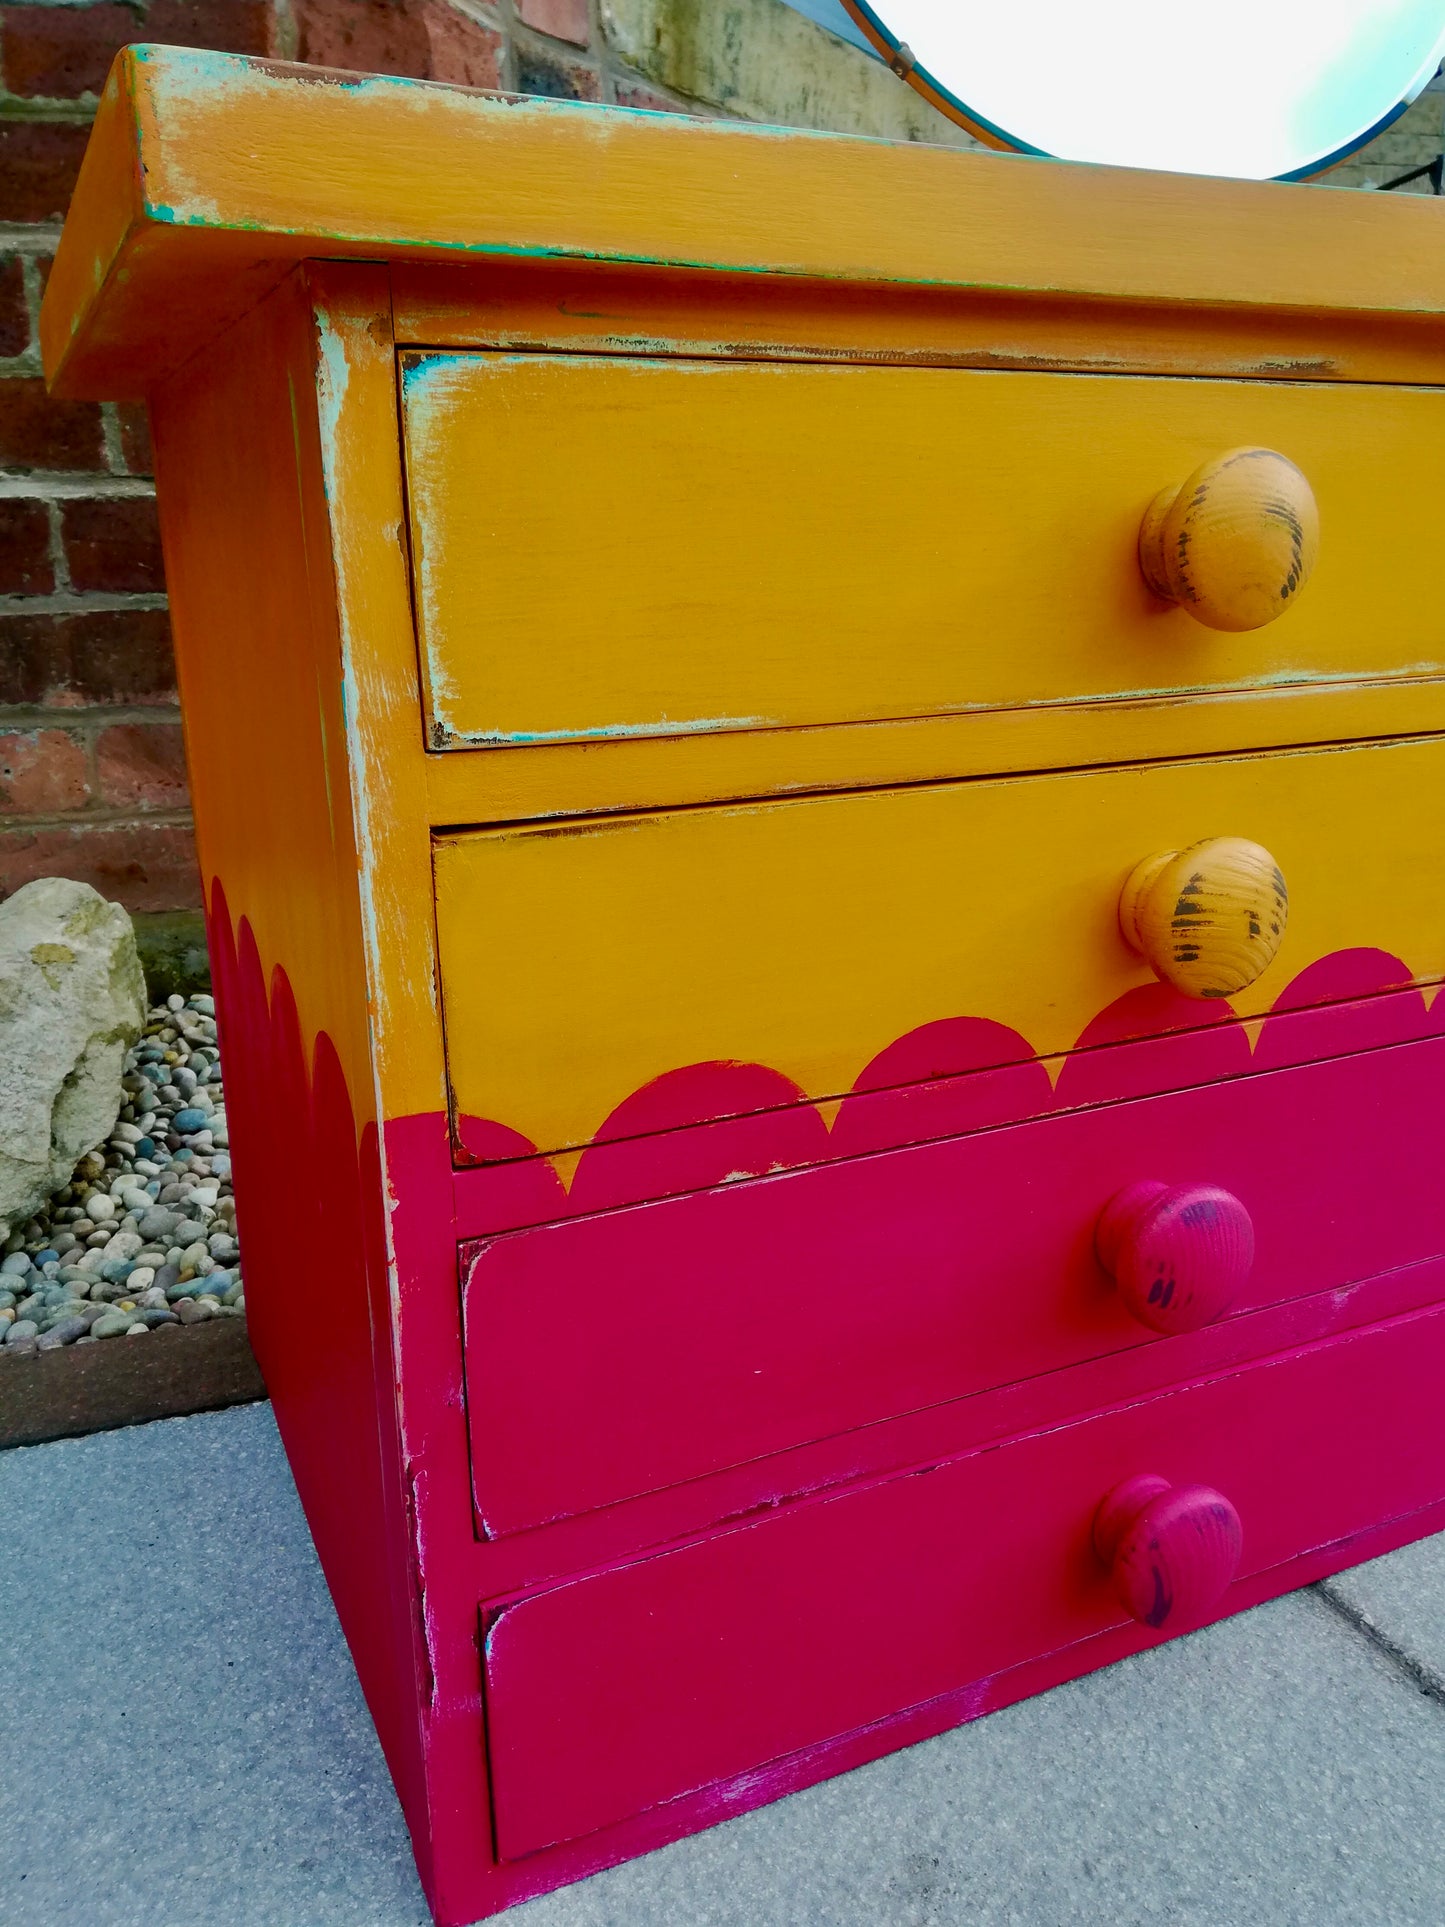 Painted to order - Vintage furniture with scallop design